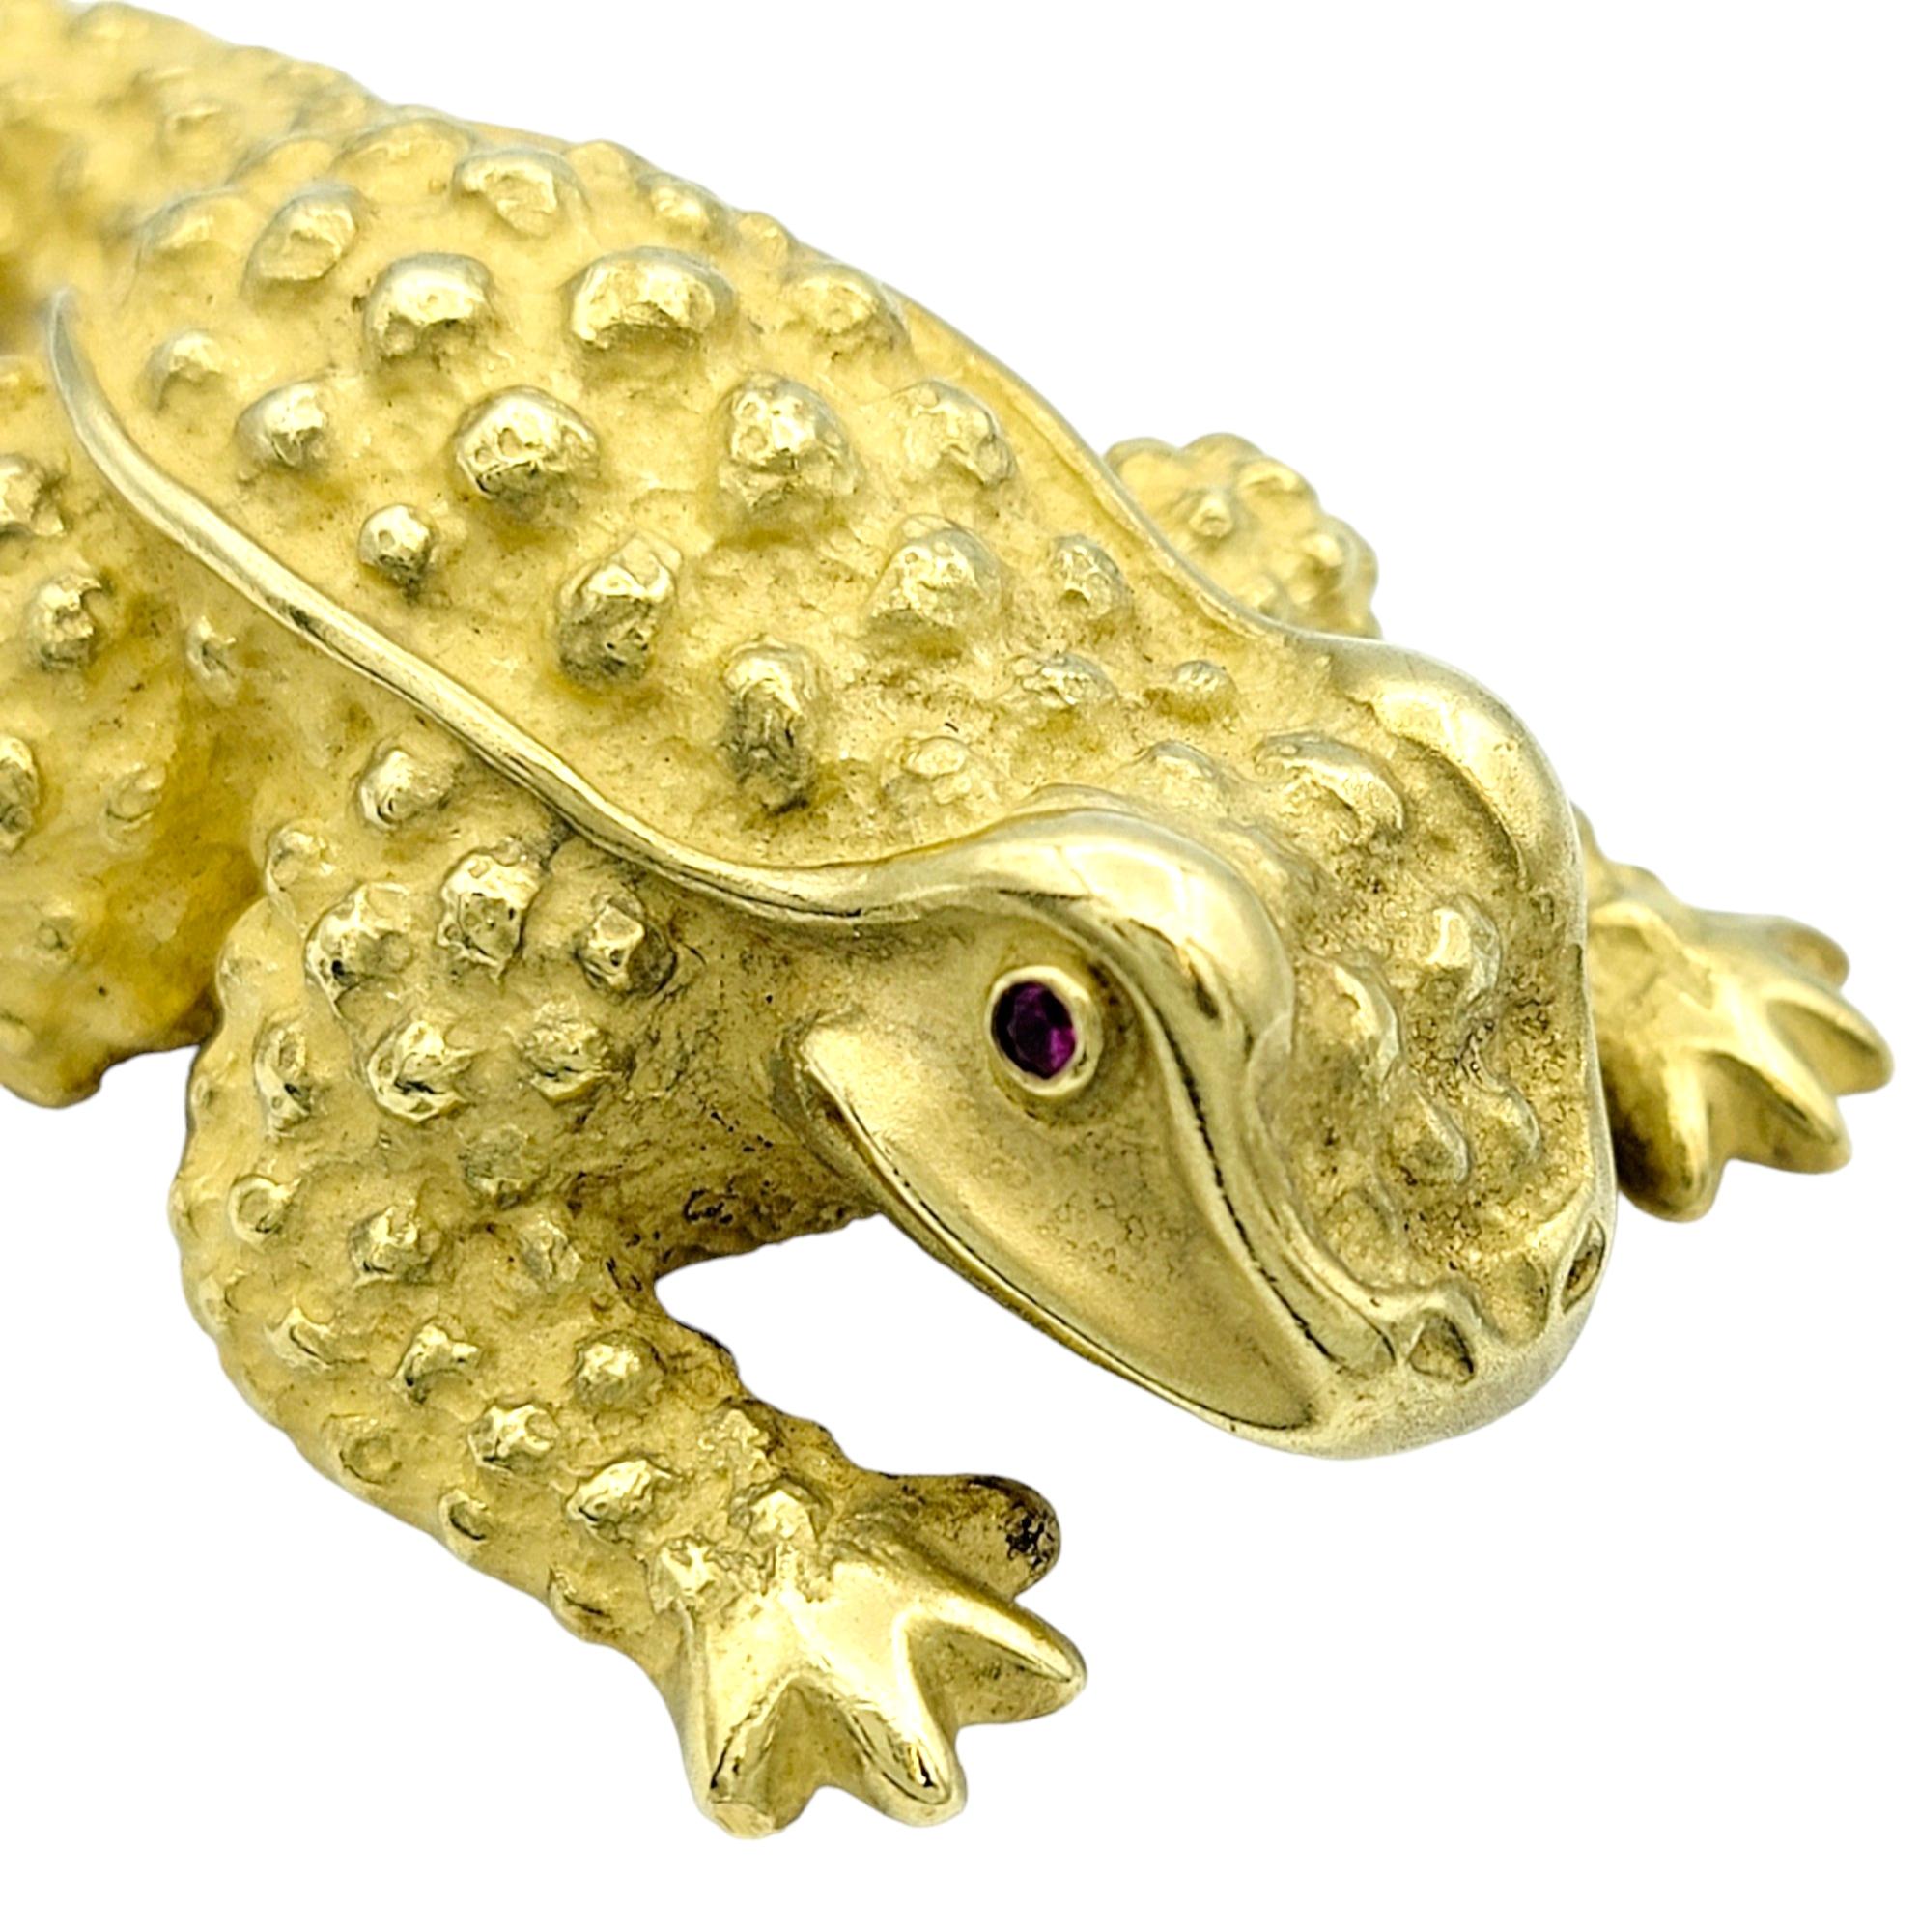 This captivating Kieselstein Cord brooch features a charming depiction of a toad in a mid-crawl stance, crafted from luxurious 18 karat yellow gold. The lifelike detailing of the toad's form, captured in intricate goldwork, adds depth and character